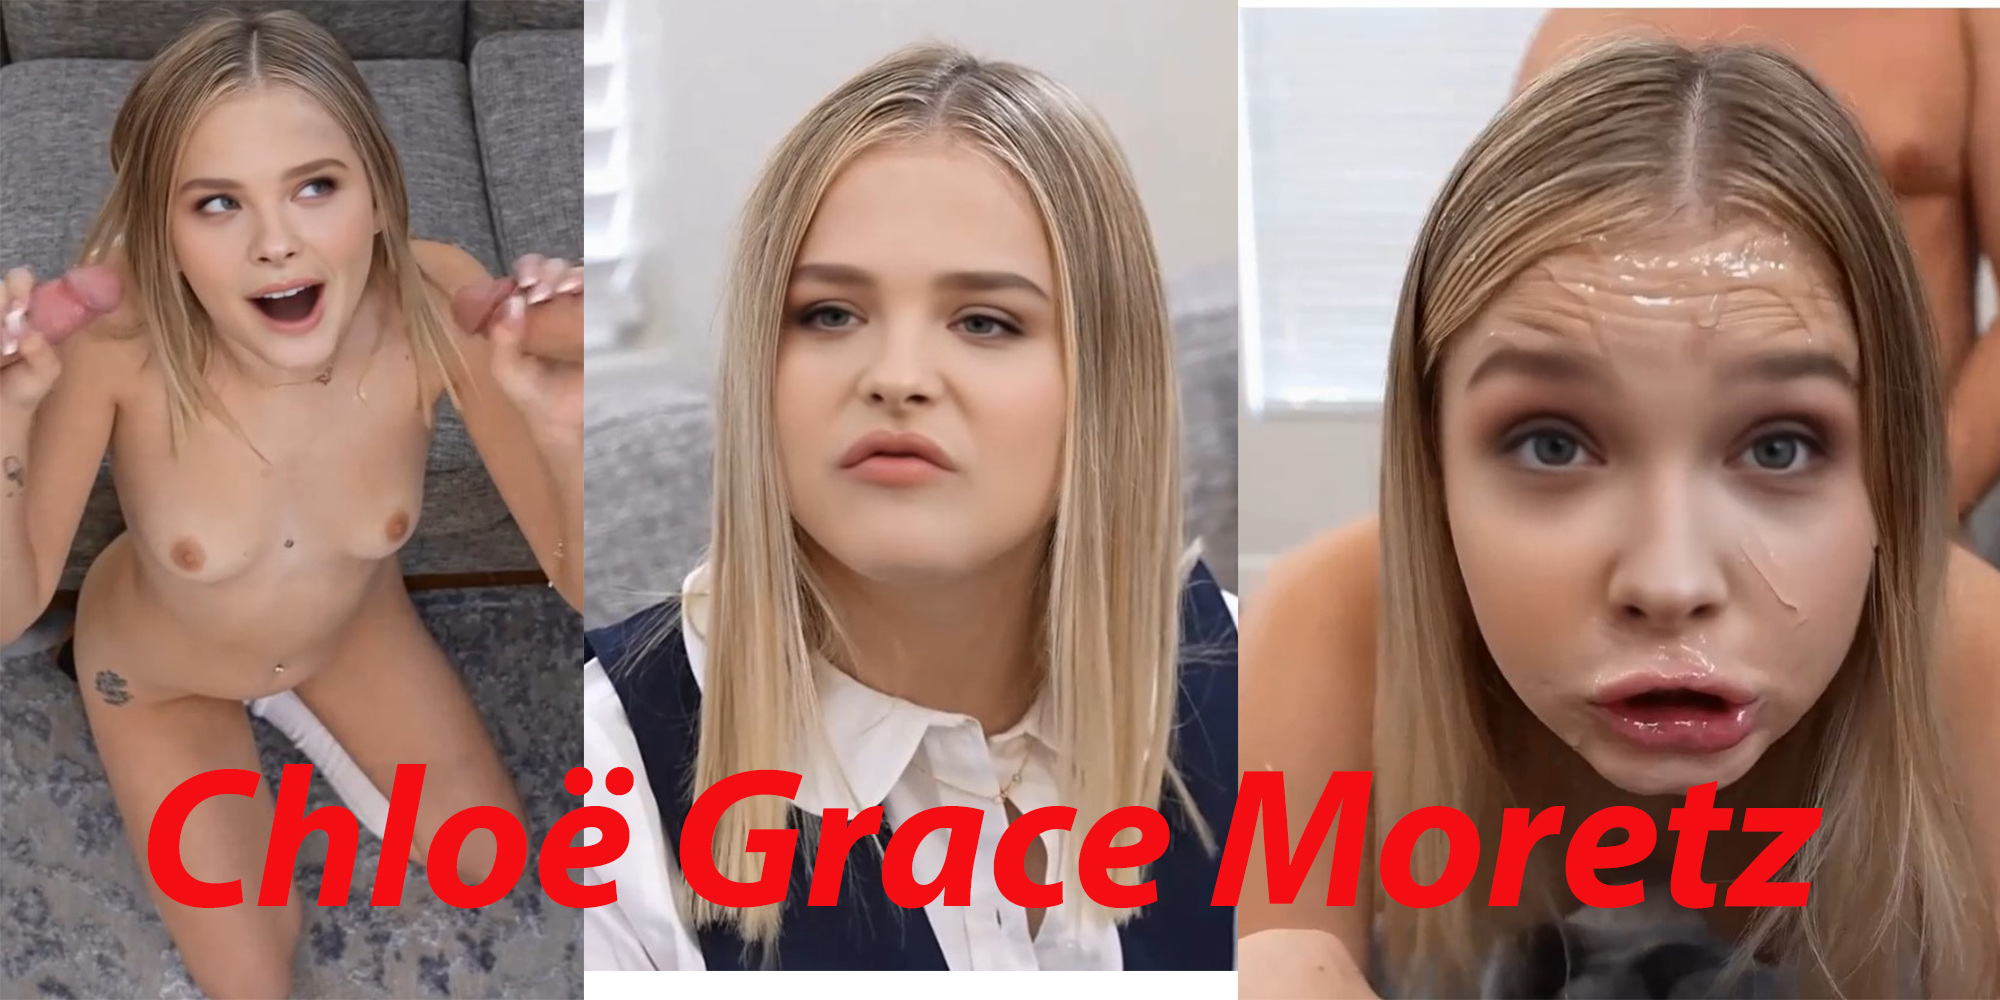 Chloe Grace Moretz needs you to pretend to be her daddy